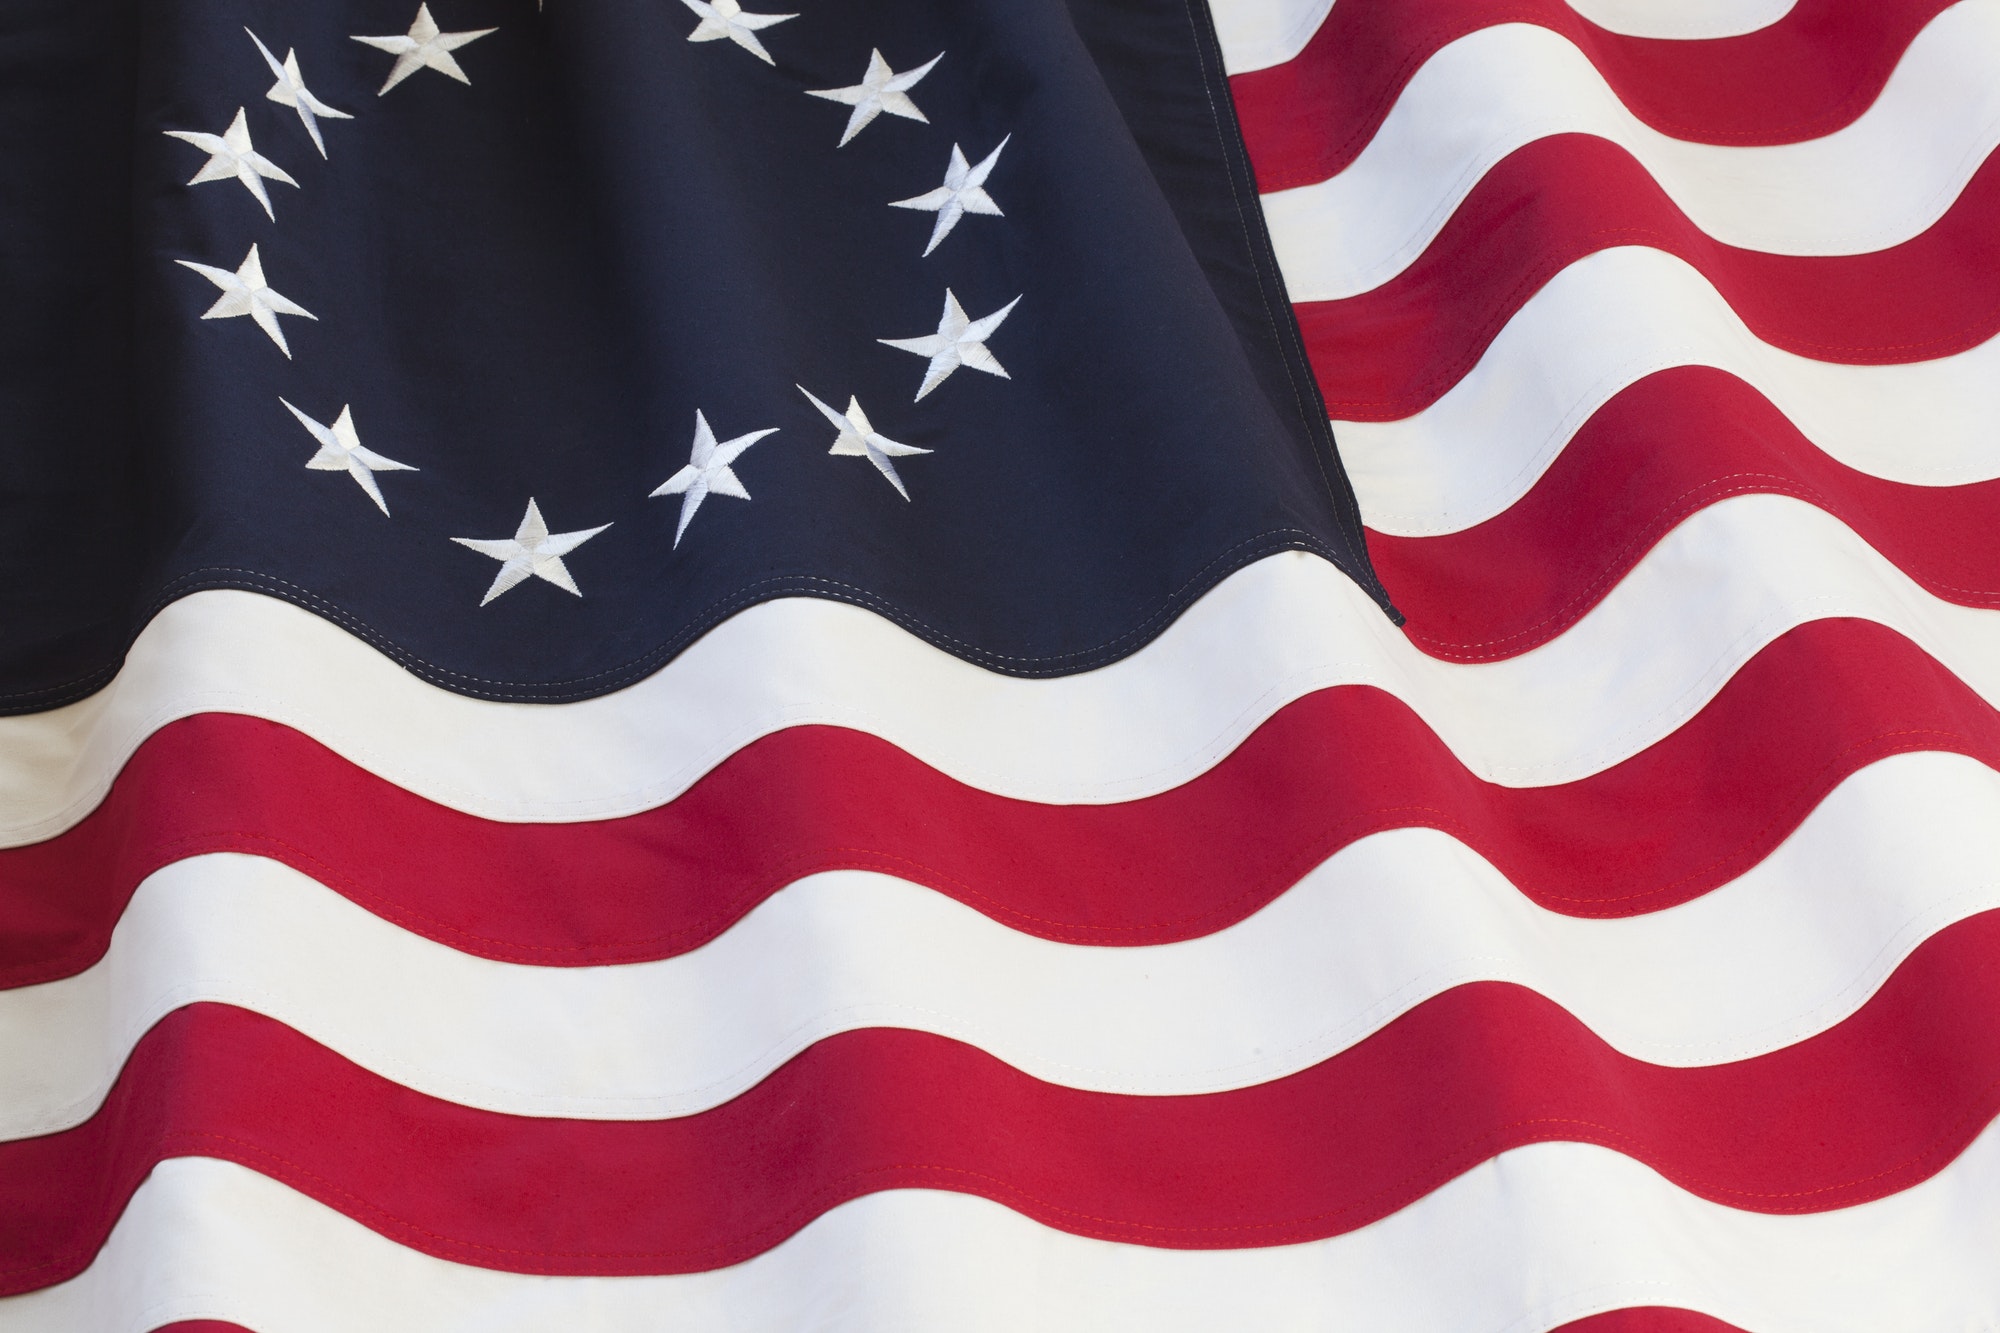 Thirteen Star Flag of the United States